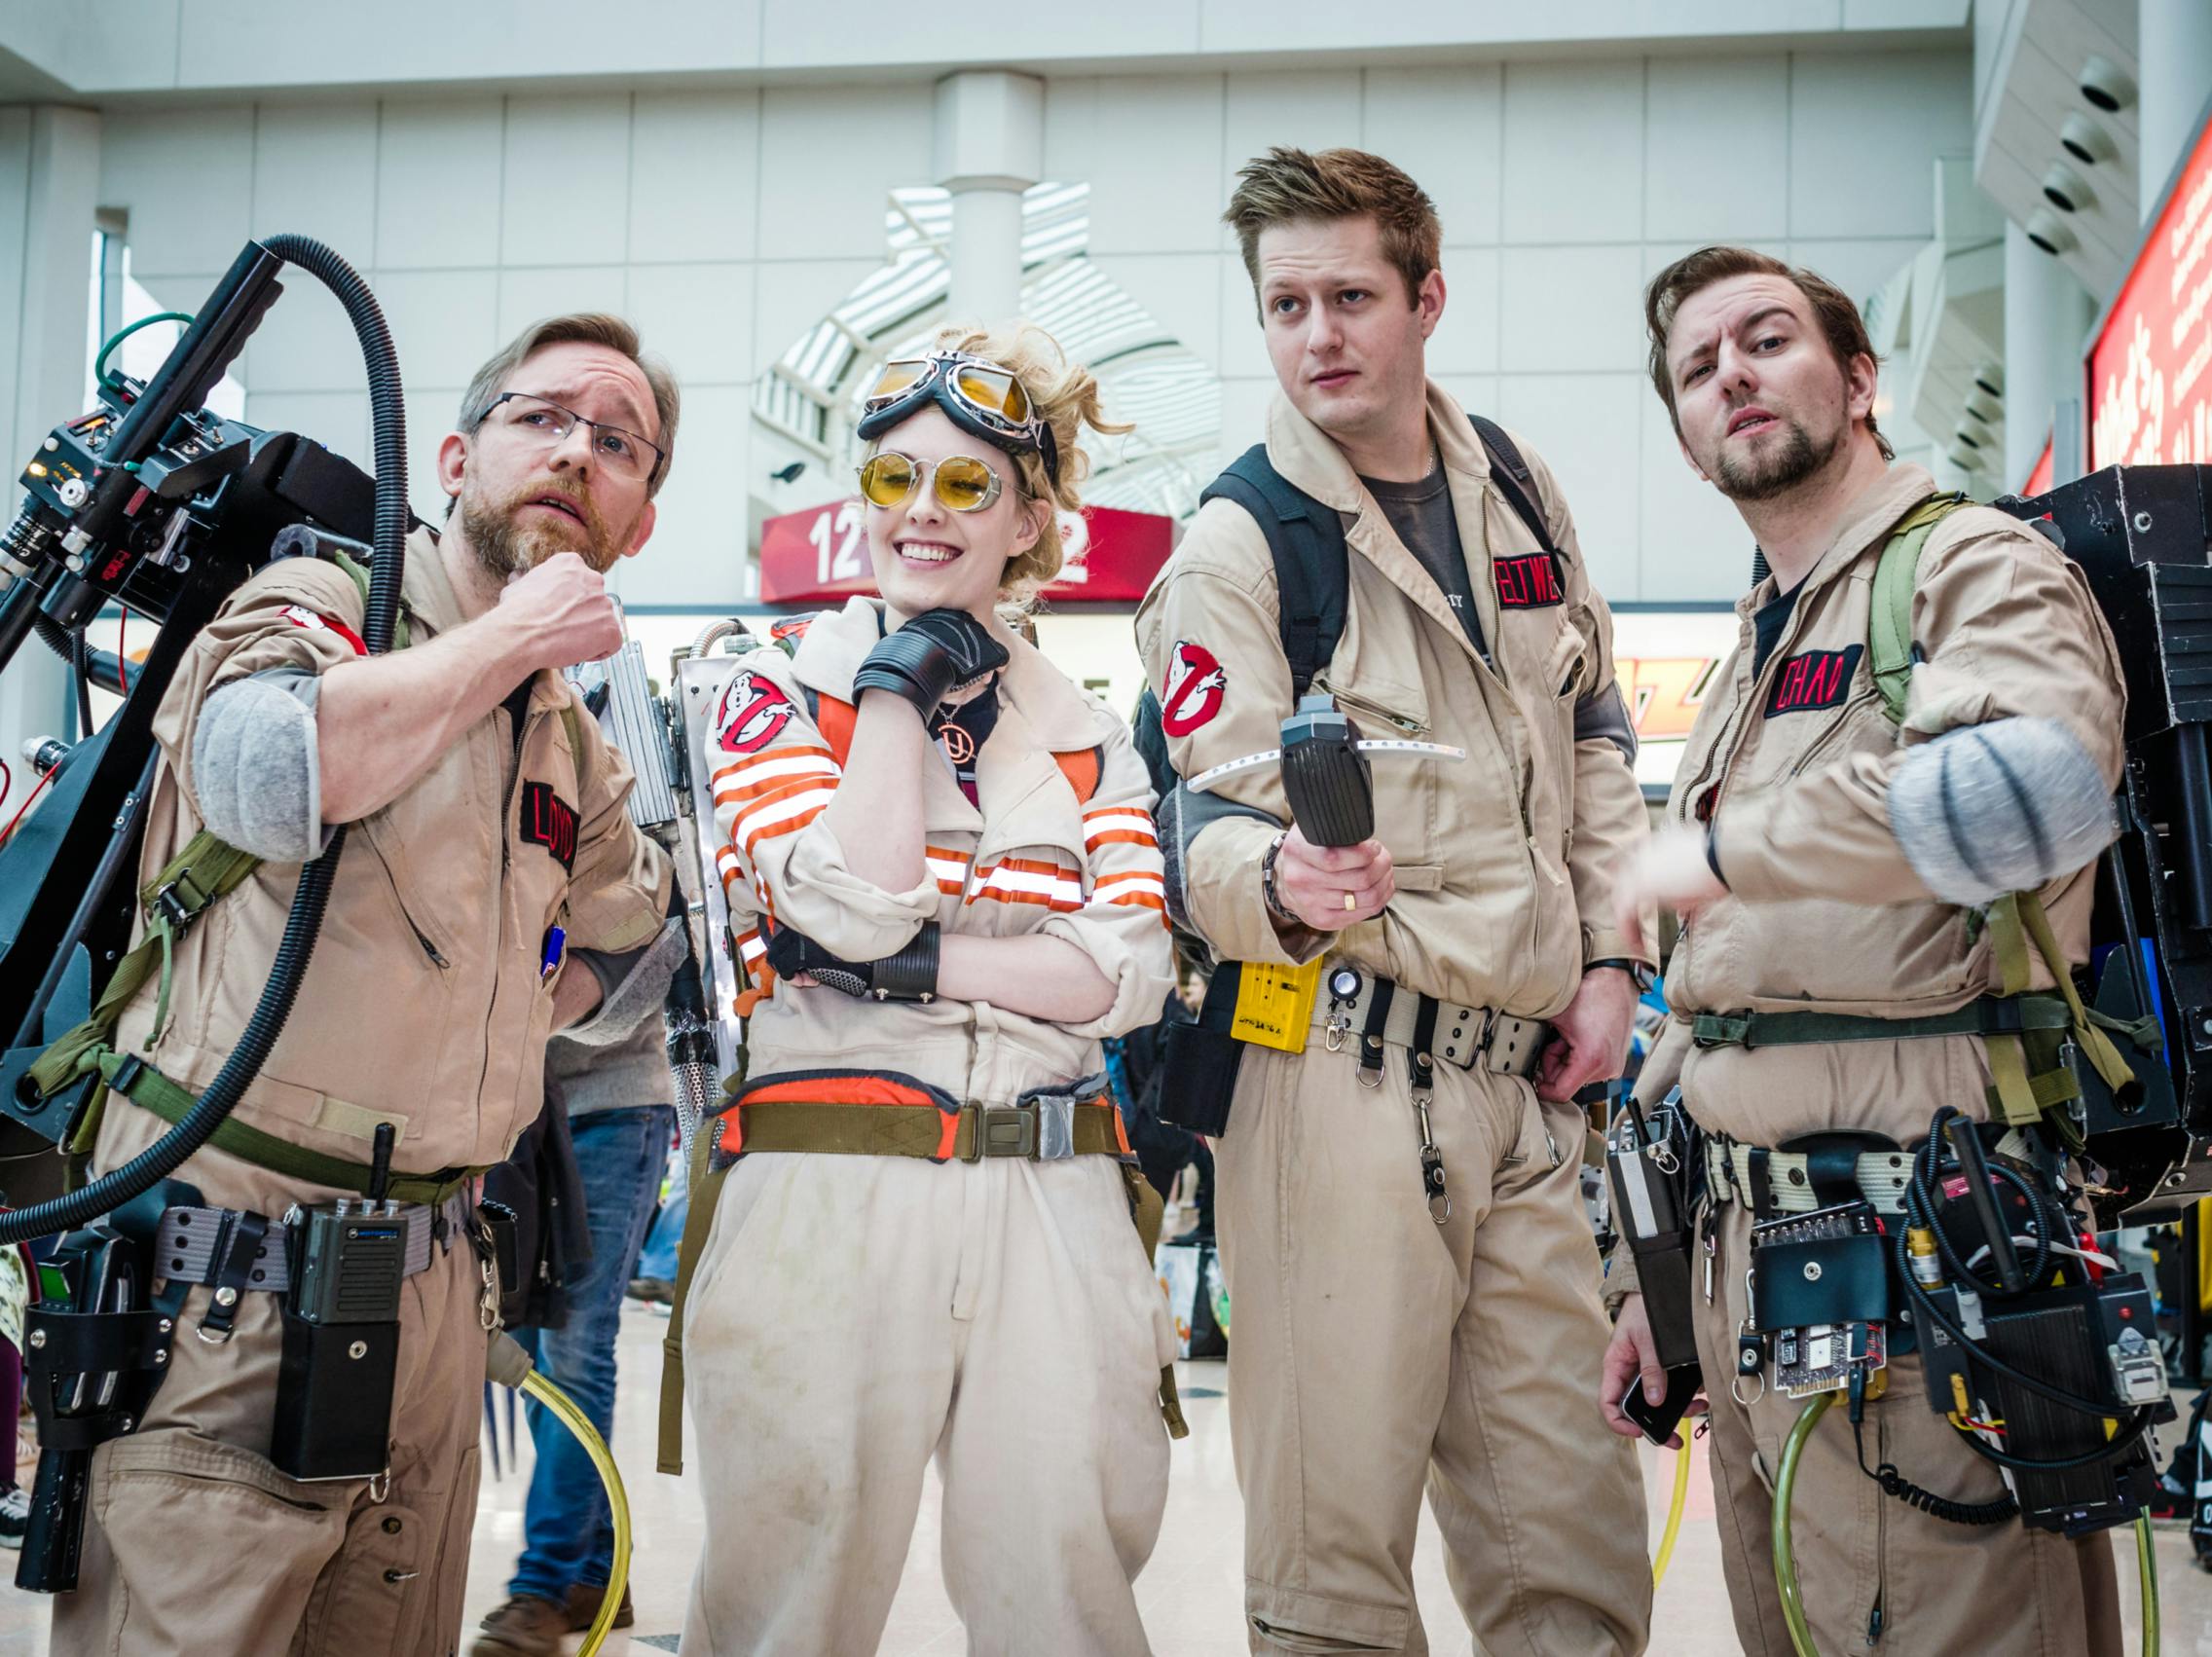 A group of people dressed in Ghostbusters costumes at a comic convention.